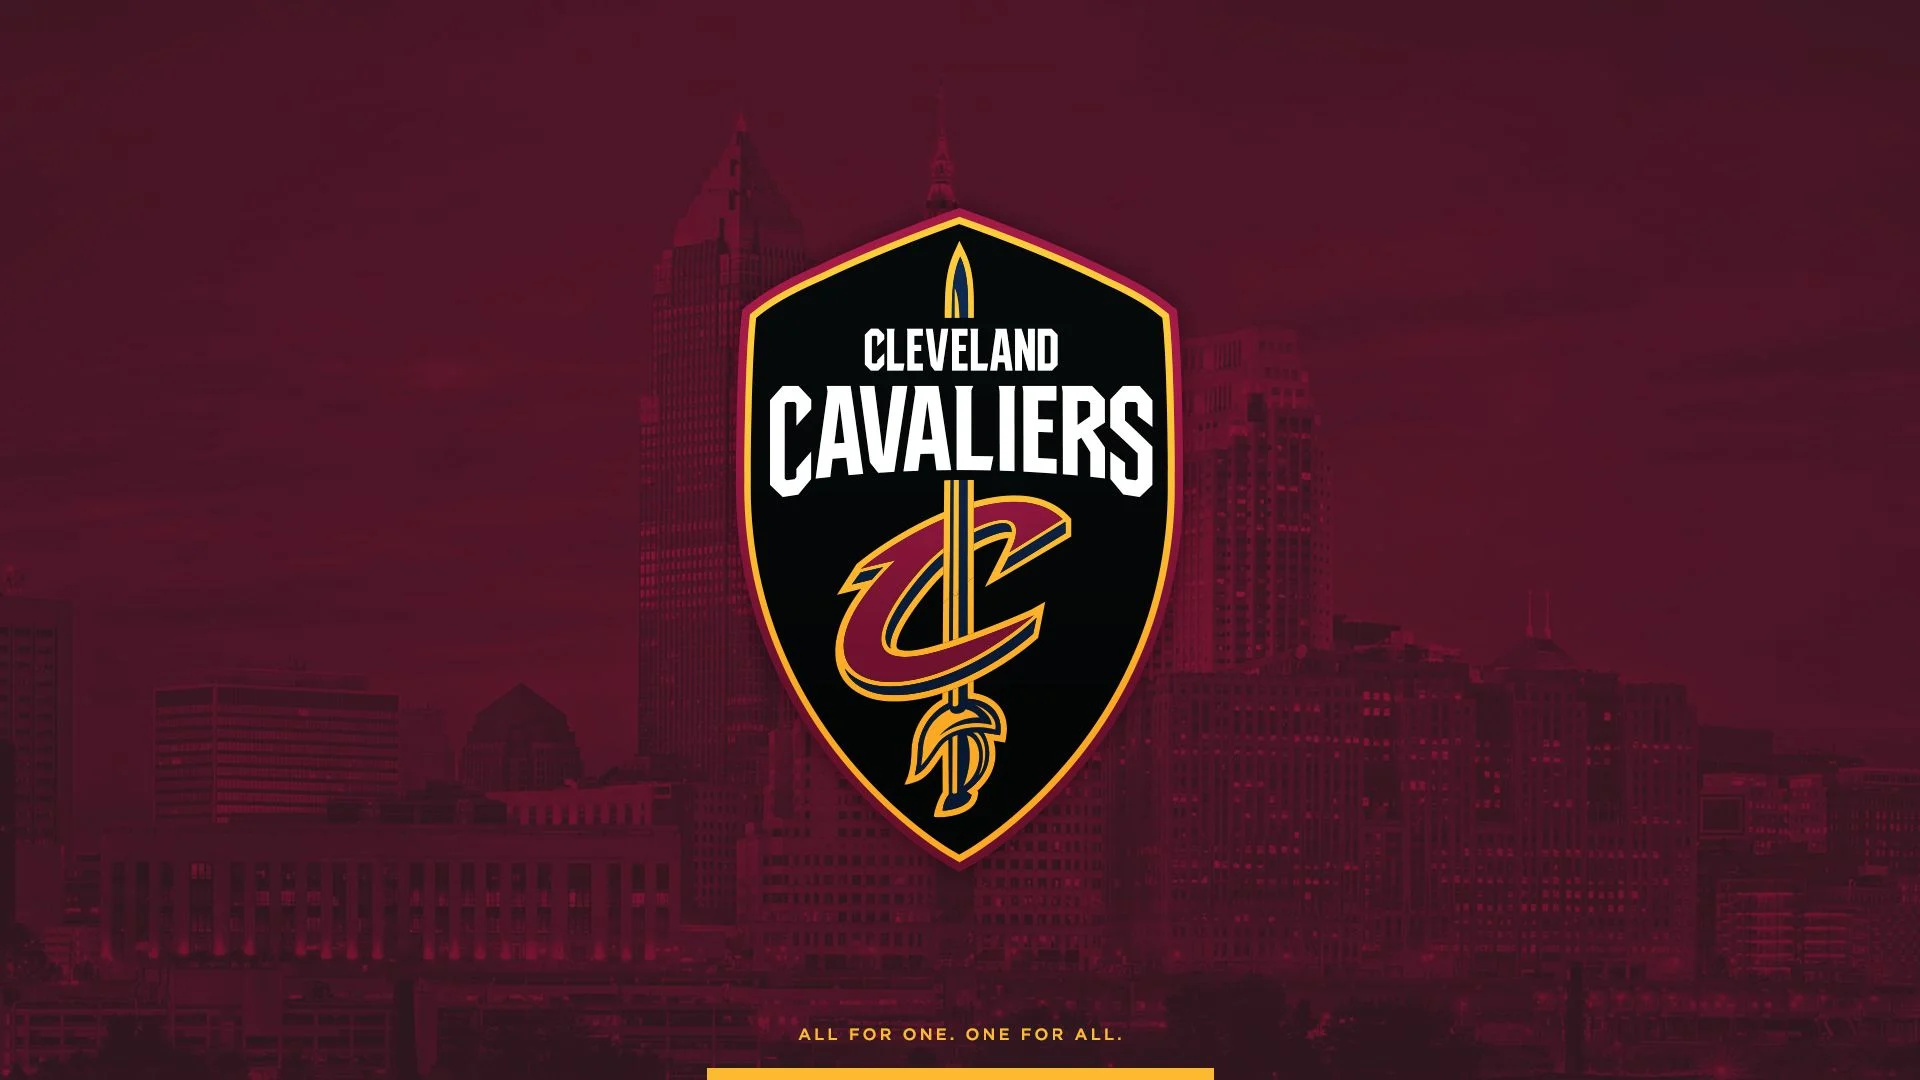 Cleveland Cavaliers: The team won their first NBA Championship in 2016. 1920x1080 Full HD Wallpaper.